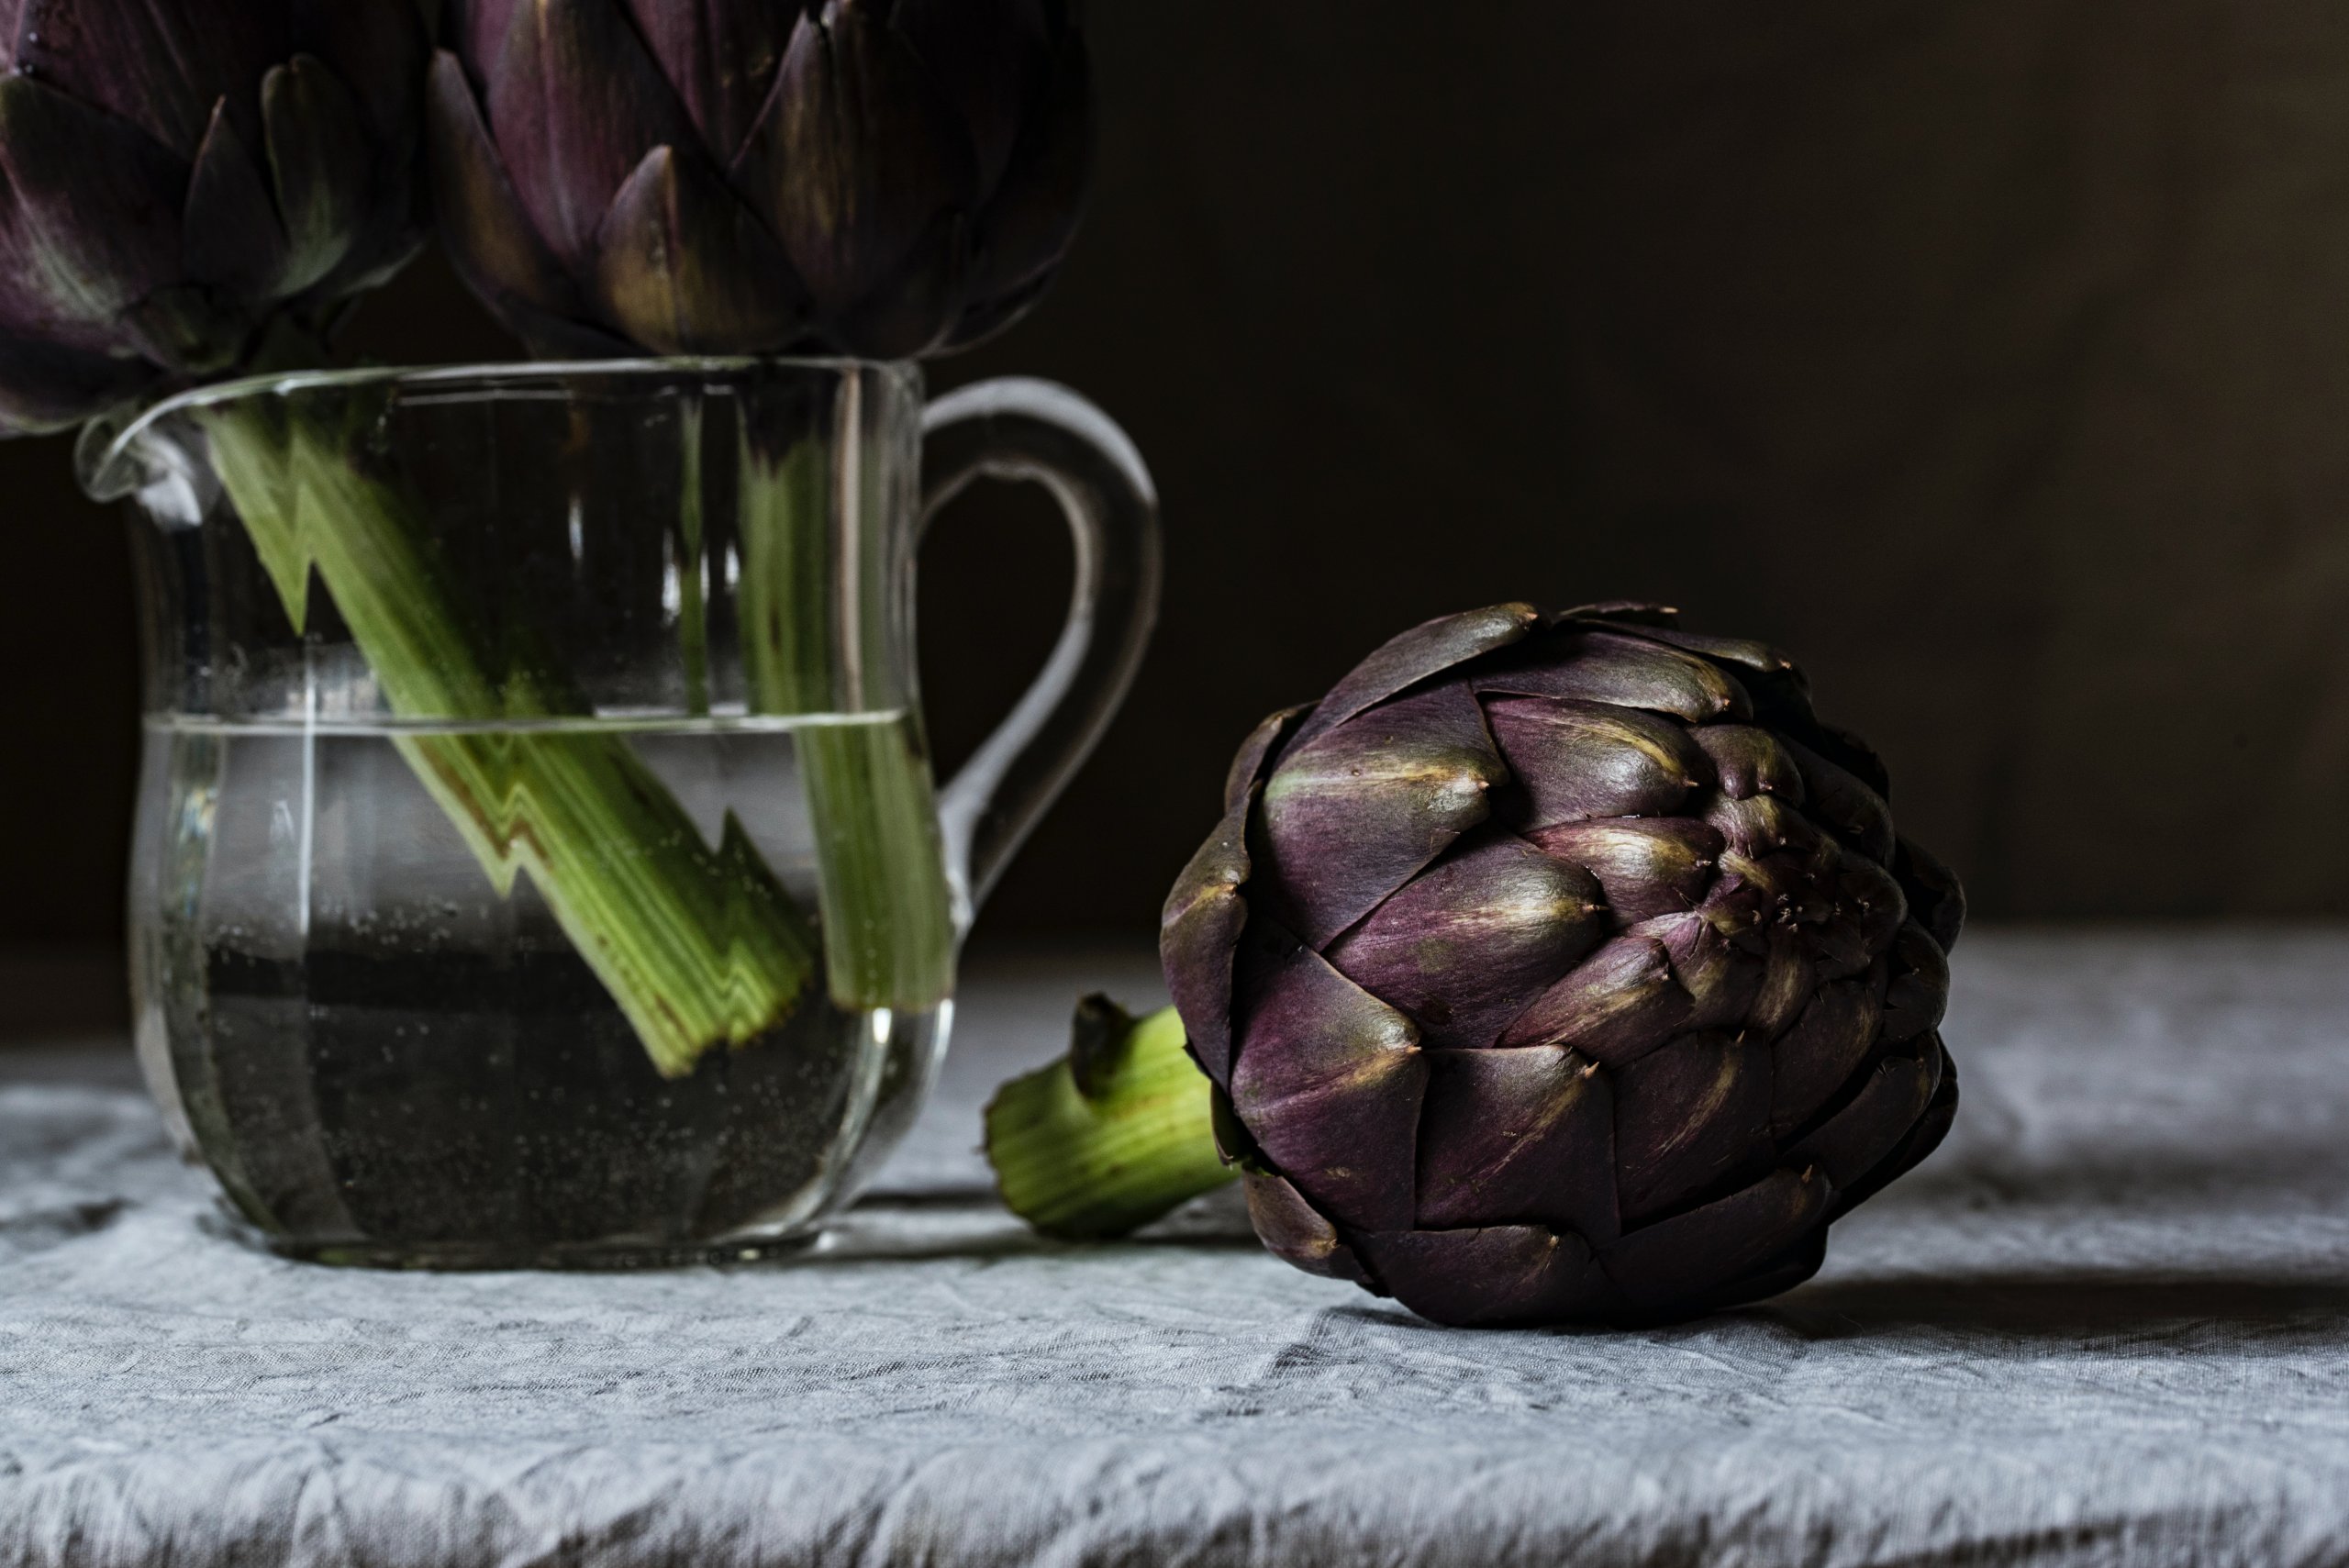 set against a black background, two dark purple heads of artichoke sit in a clear glass jug of water, a third lies on the grey table cloth next to them.